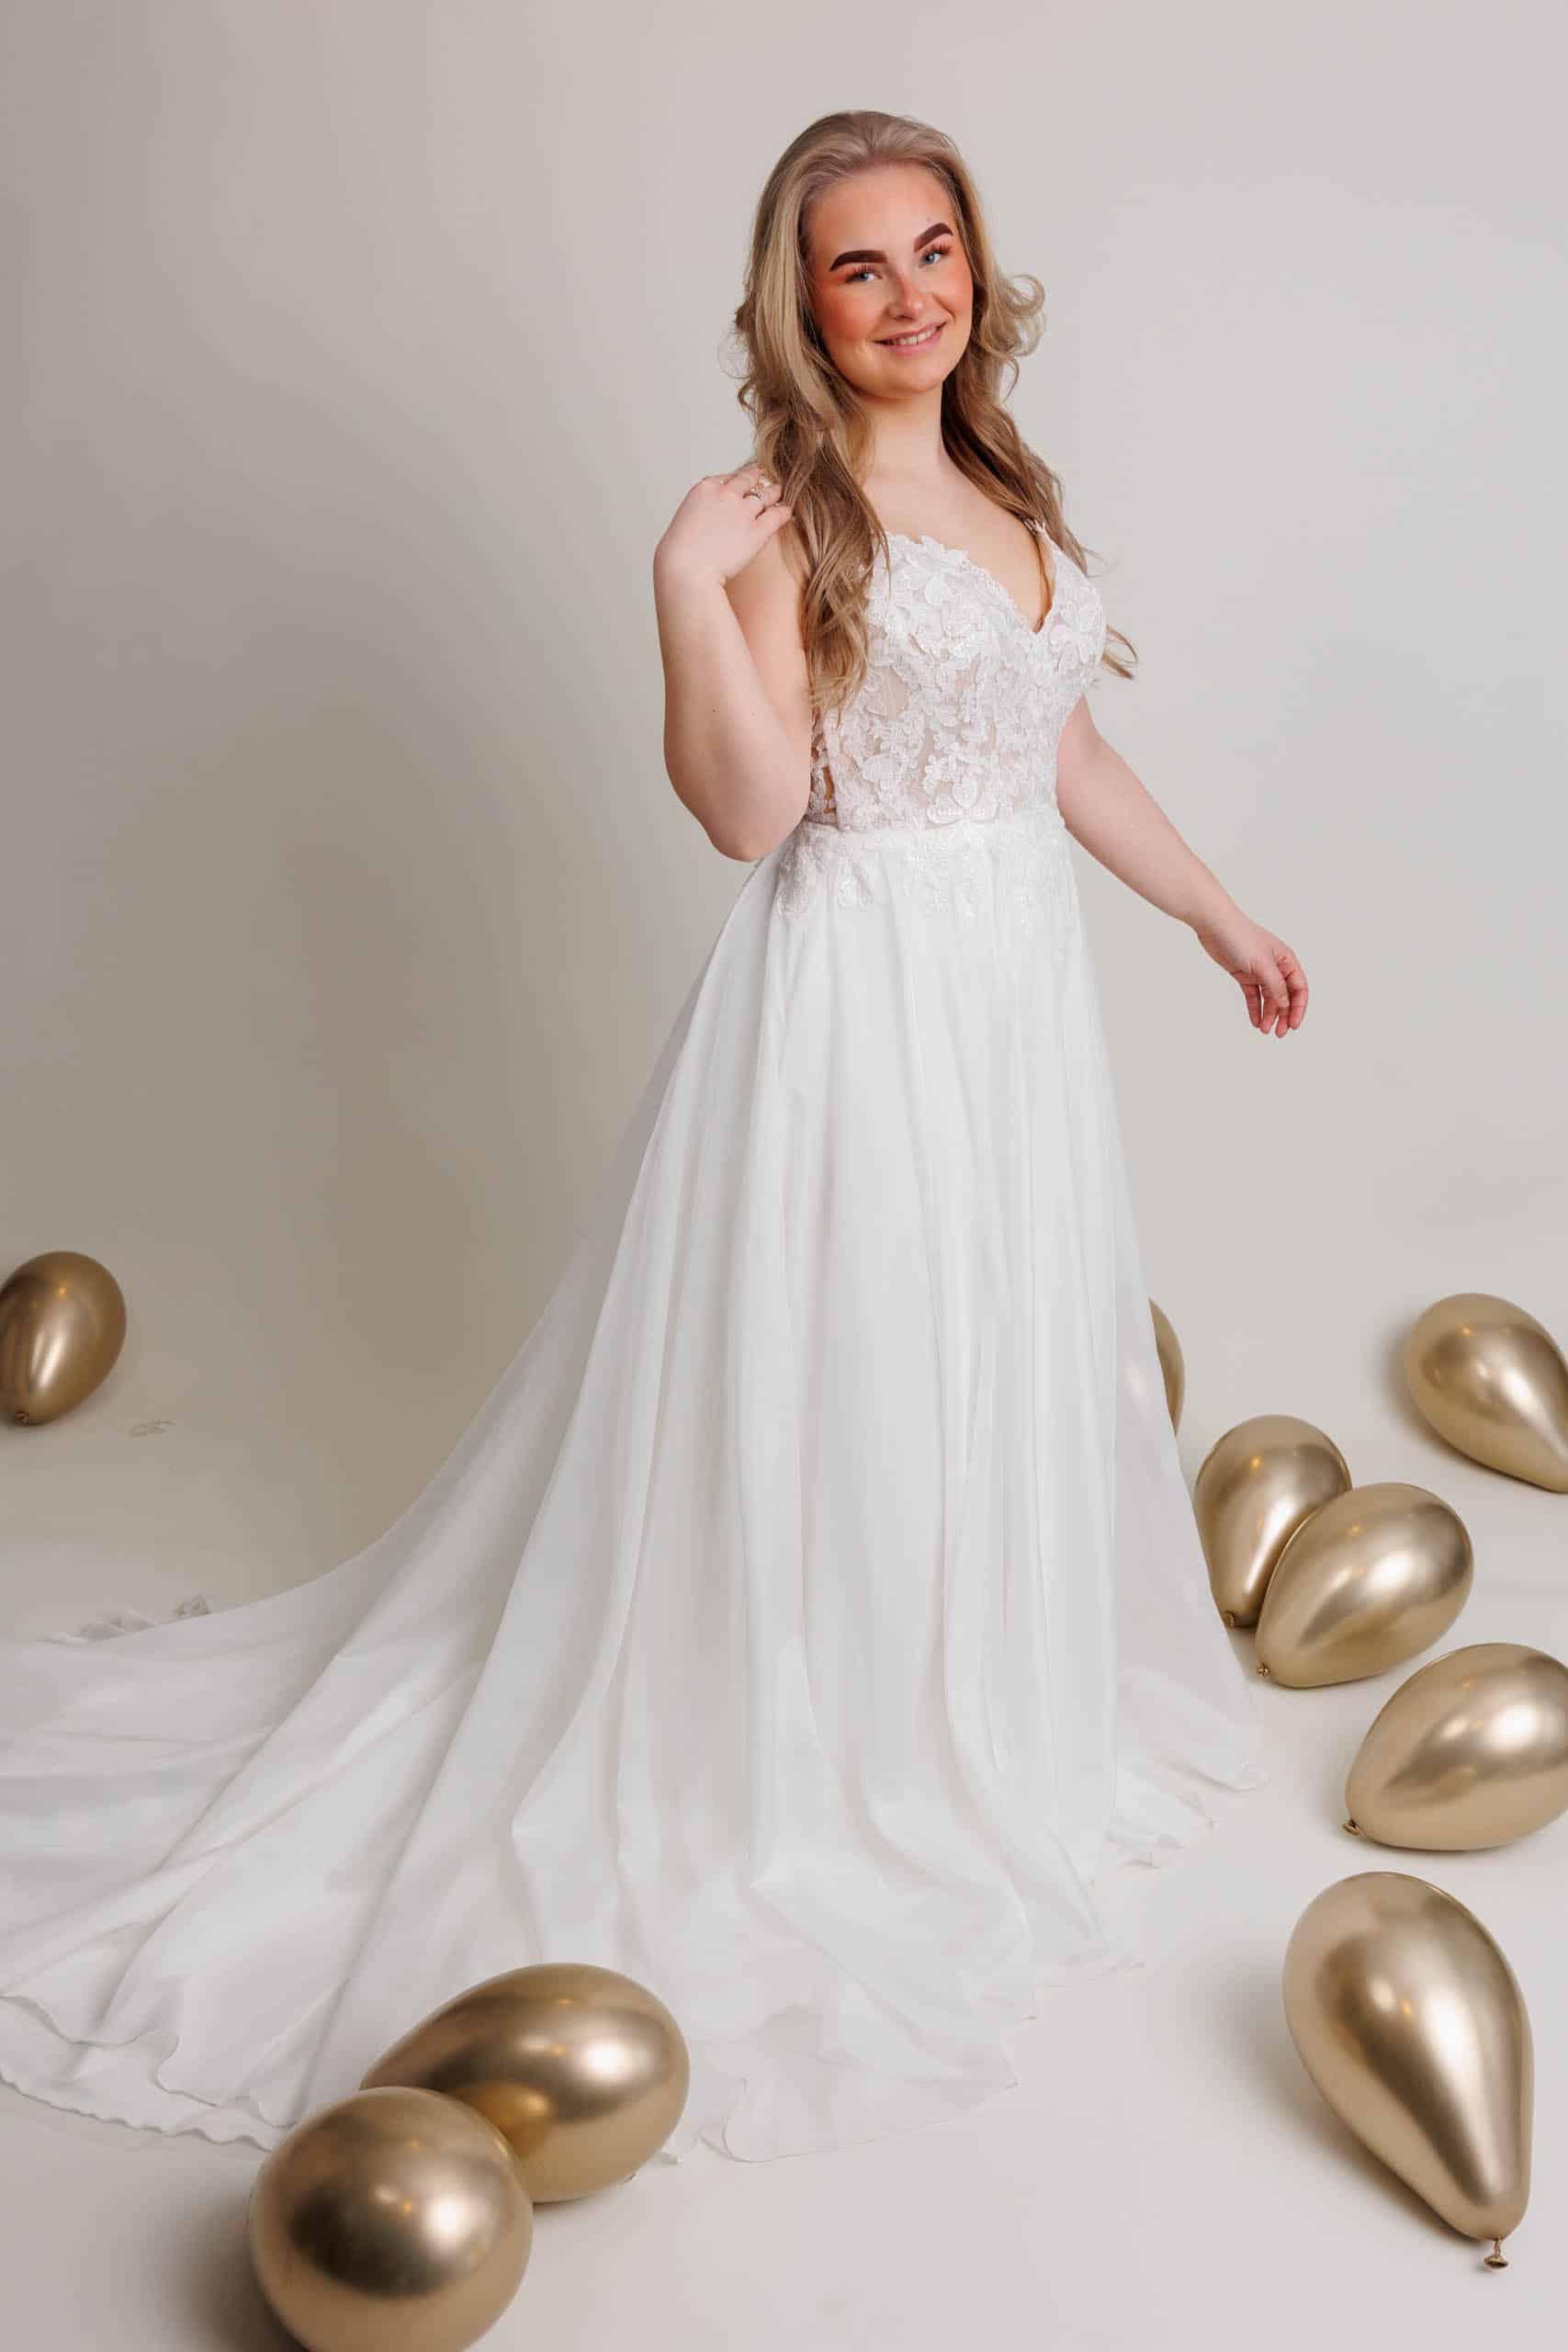 A woman in a white wedding dress poses with gold balloons while trying on wedding dresses for fun.